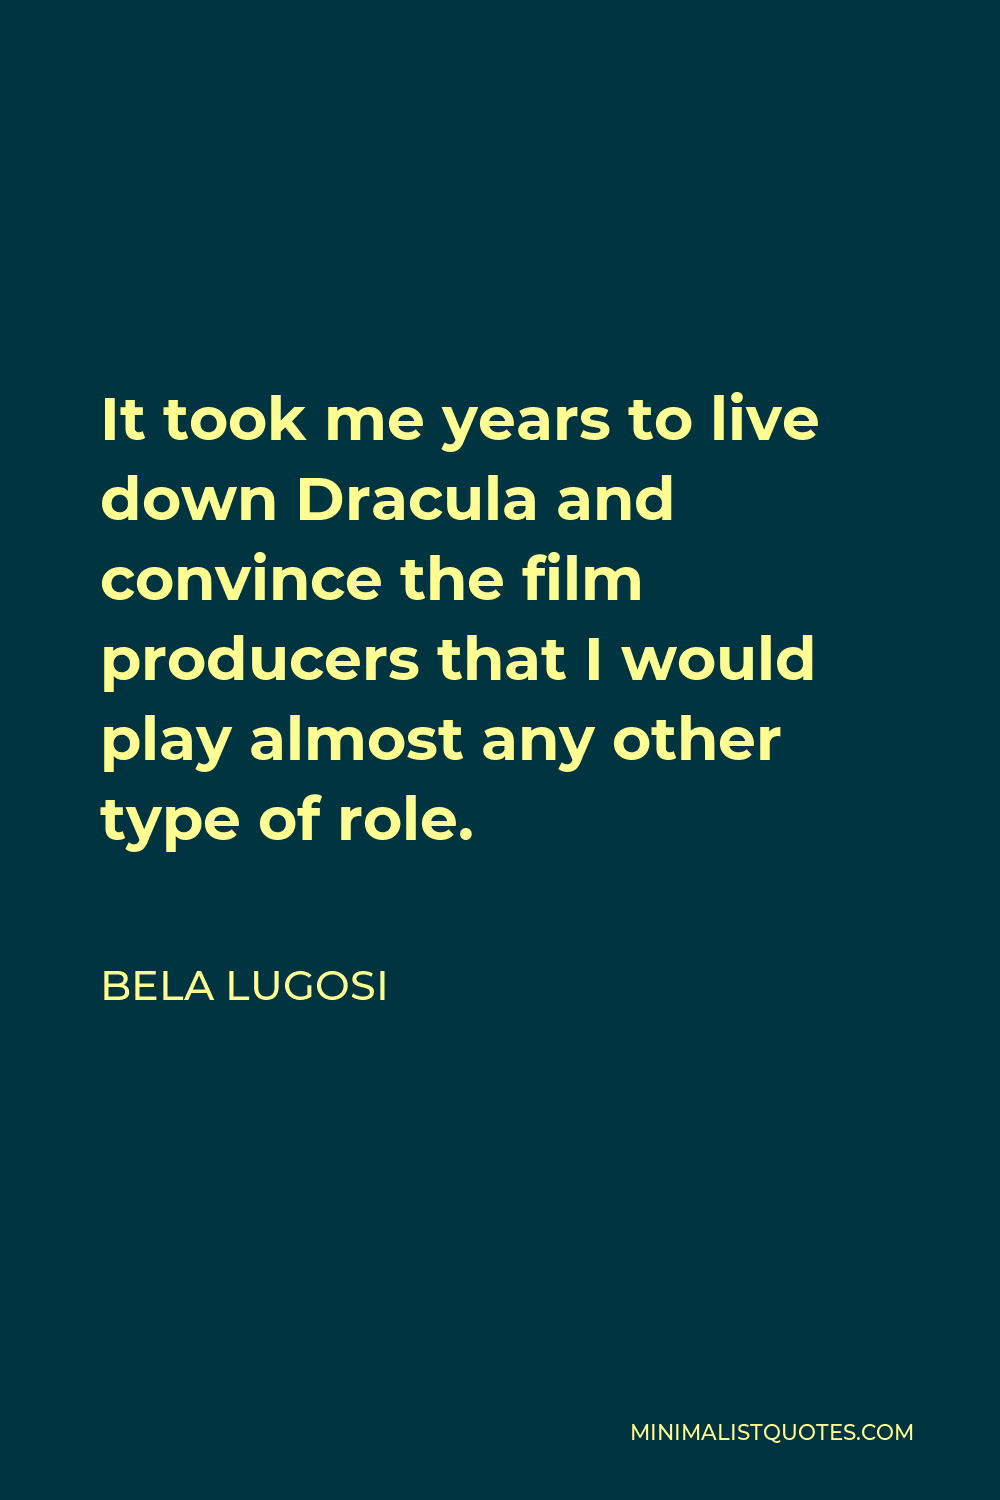 Bela Lugosi Quote - It took me years to live down Dracula and convince the film producers that I would play almost any other type of role.